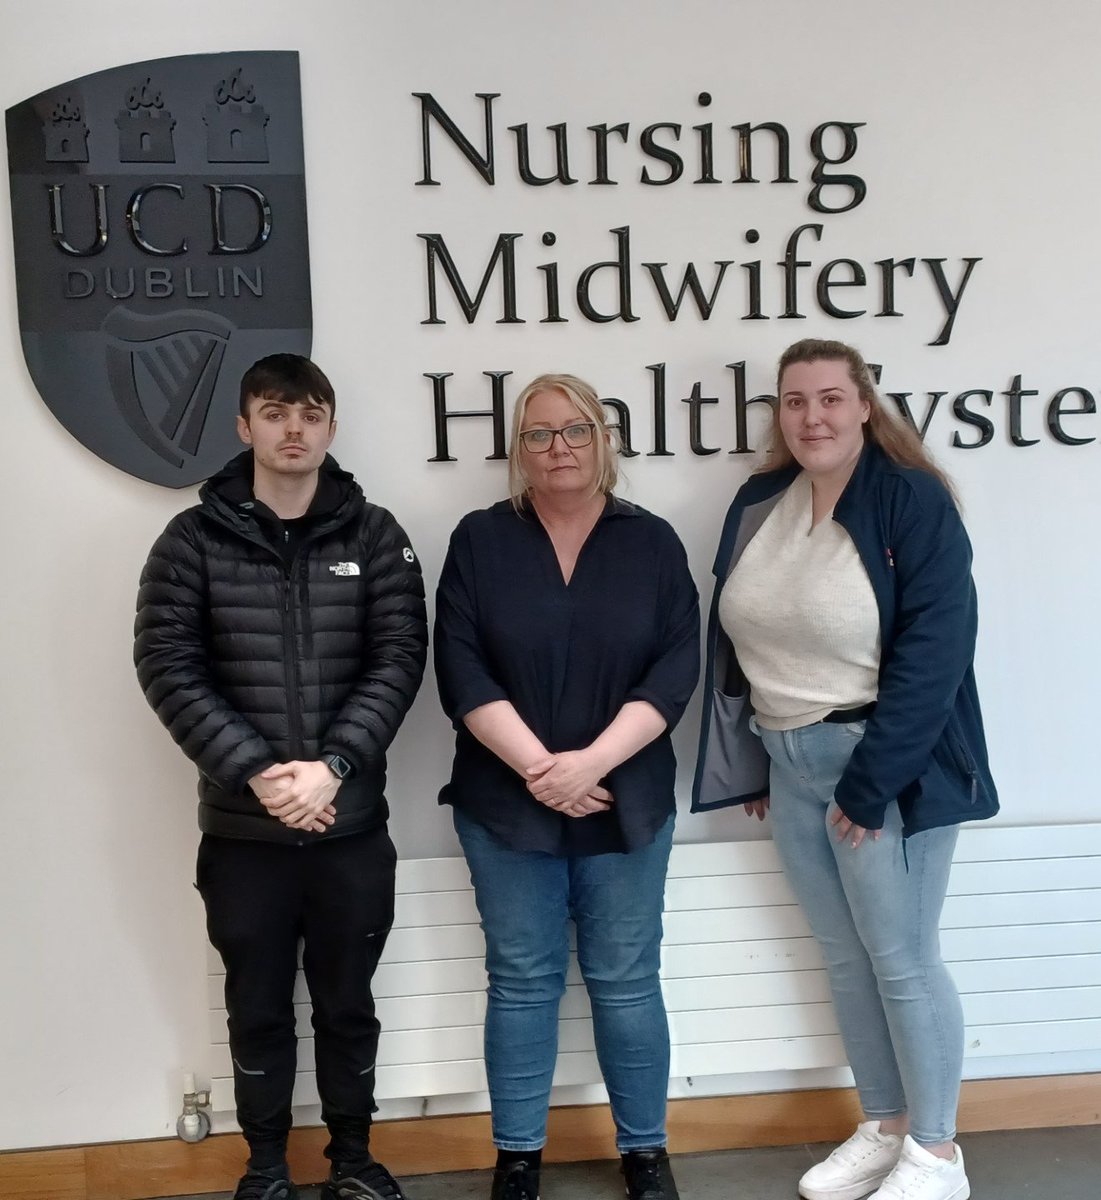 Two of our Lived Experience Ambassadors spoke about their experience of homelessness to students @ucddublin @UCDMidwifery yesterday. James & Kelie picutured here with Kate Frazer (centre) Associate Professor @UCDMidwifery Tomorrow they'll be in Brussels to attend the... 1/2